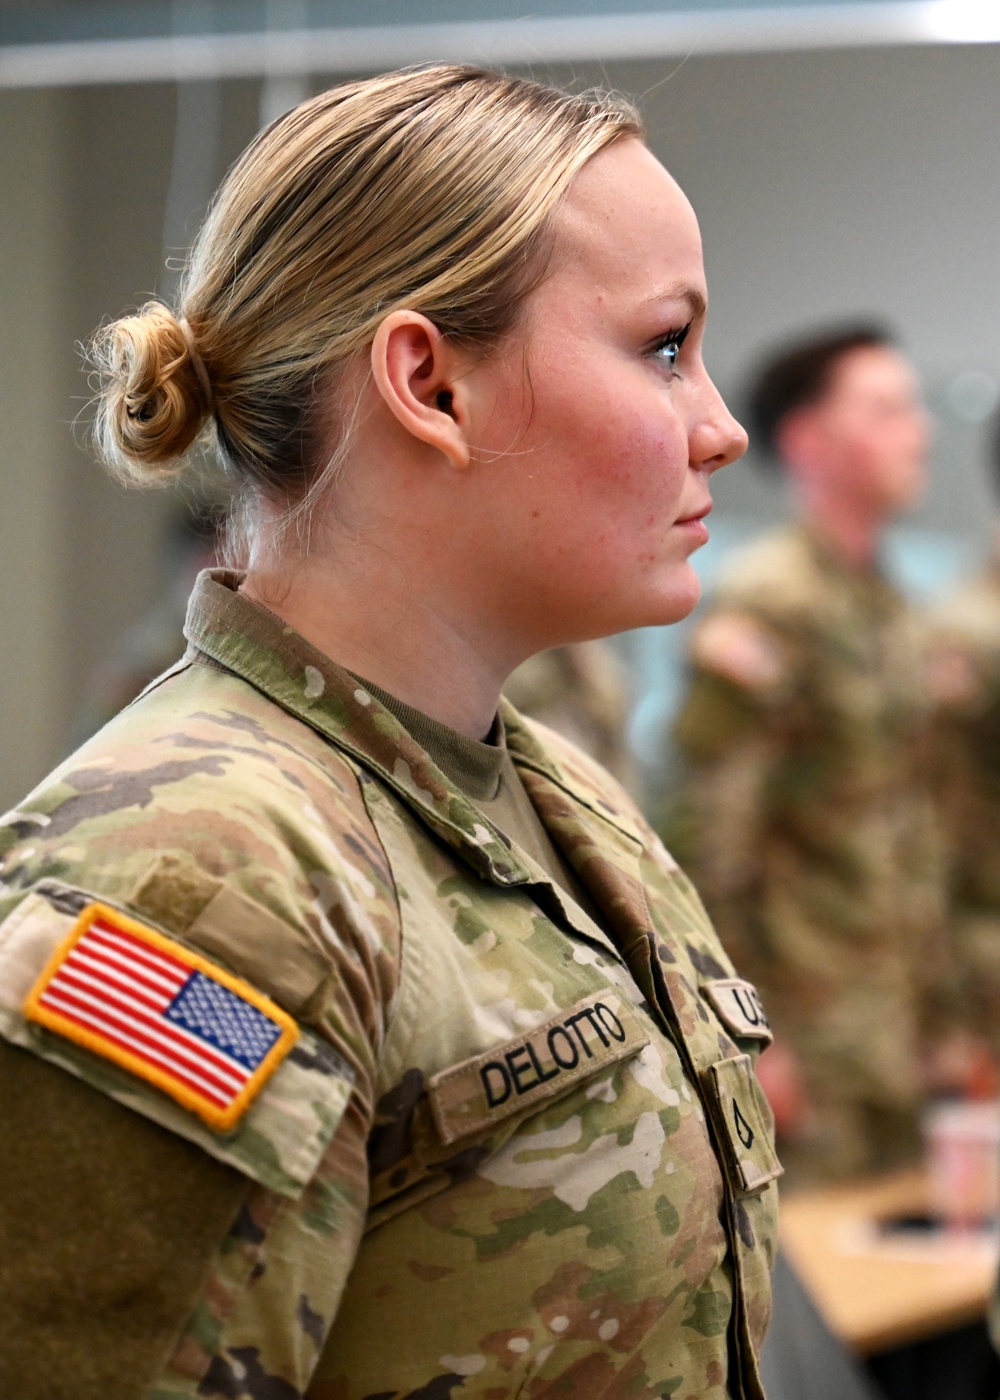 NH Guardsmen prepare for mobilization to Texas to assist with border security